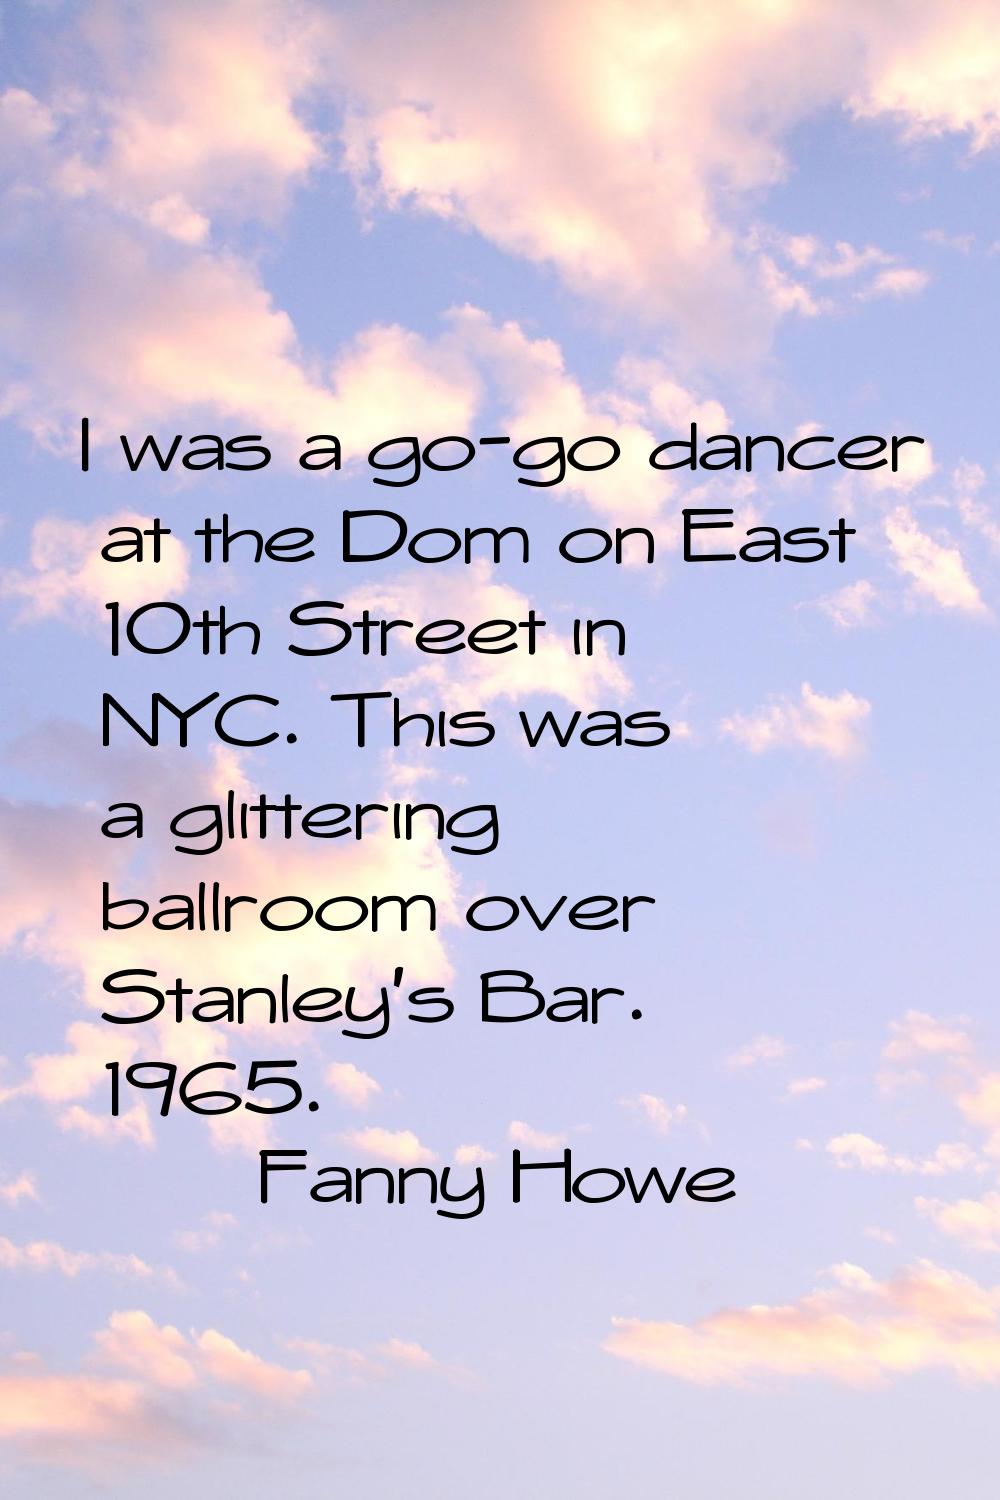 I was a go-go dancer at the Dom on East 10th Street in NYC. This was a glittering ballroom over Sta